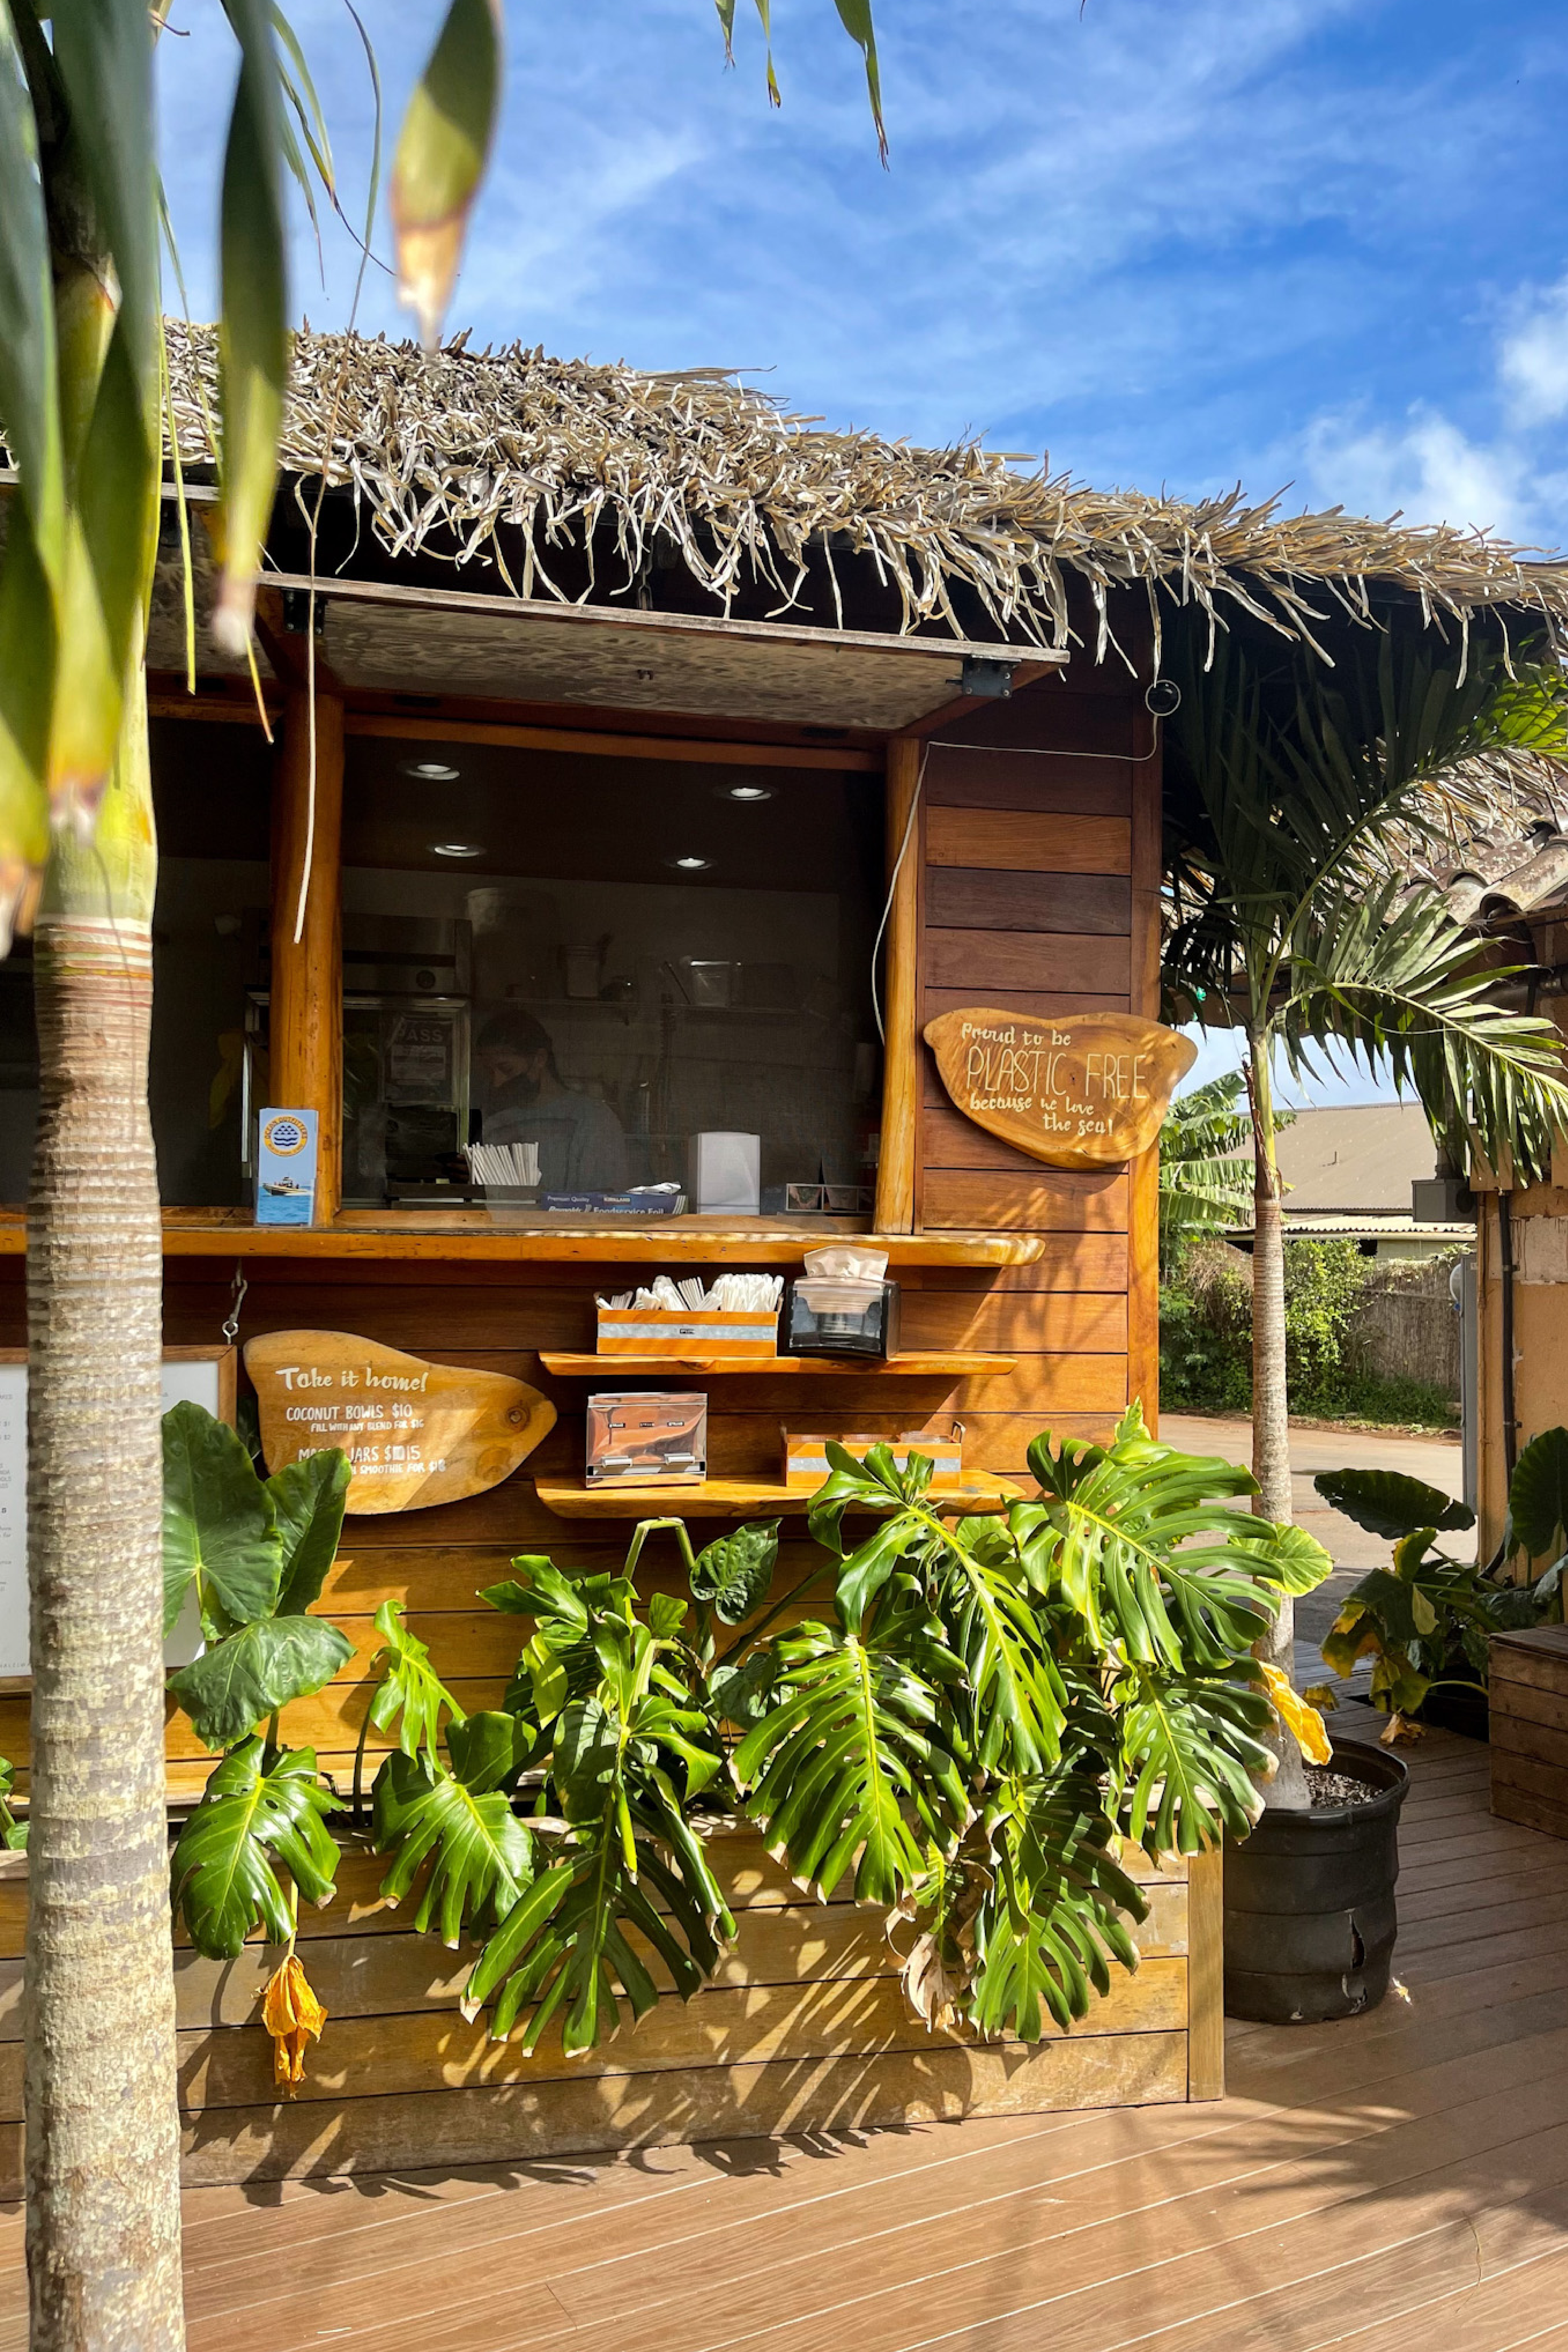 Haleiwa Bowls storefront - rich brown wood thatched hut surrounded by bright tropical greenery